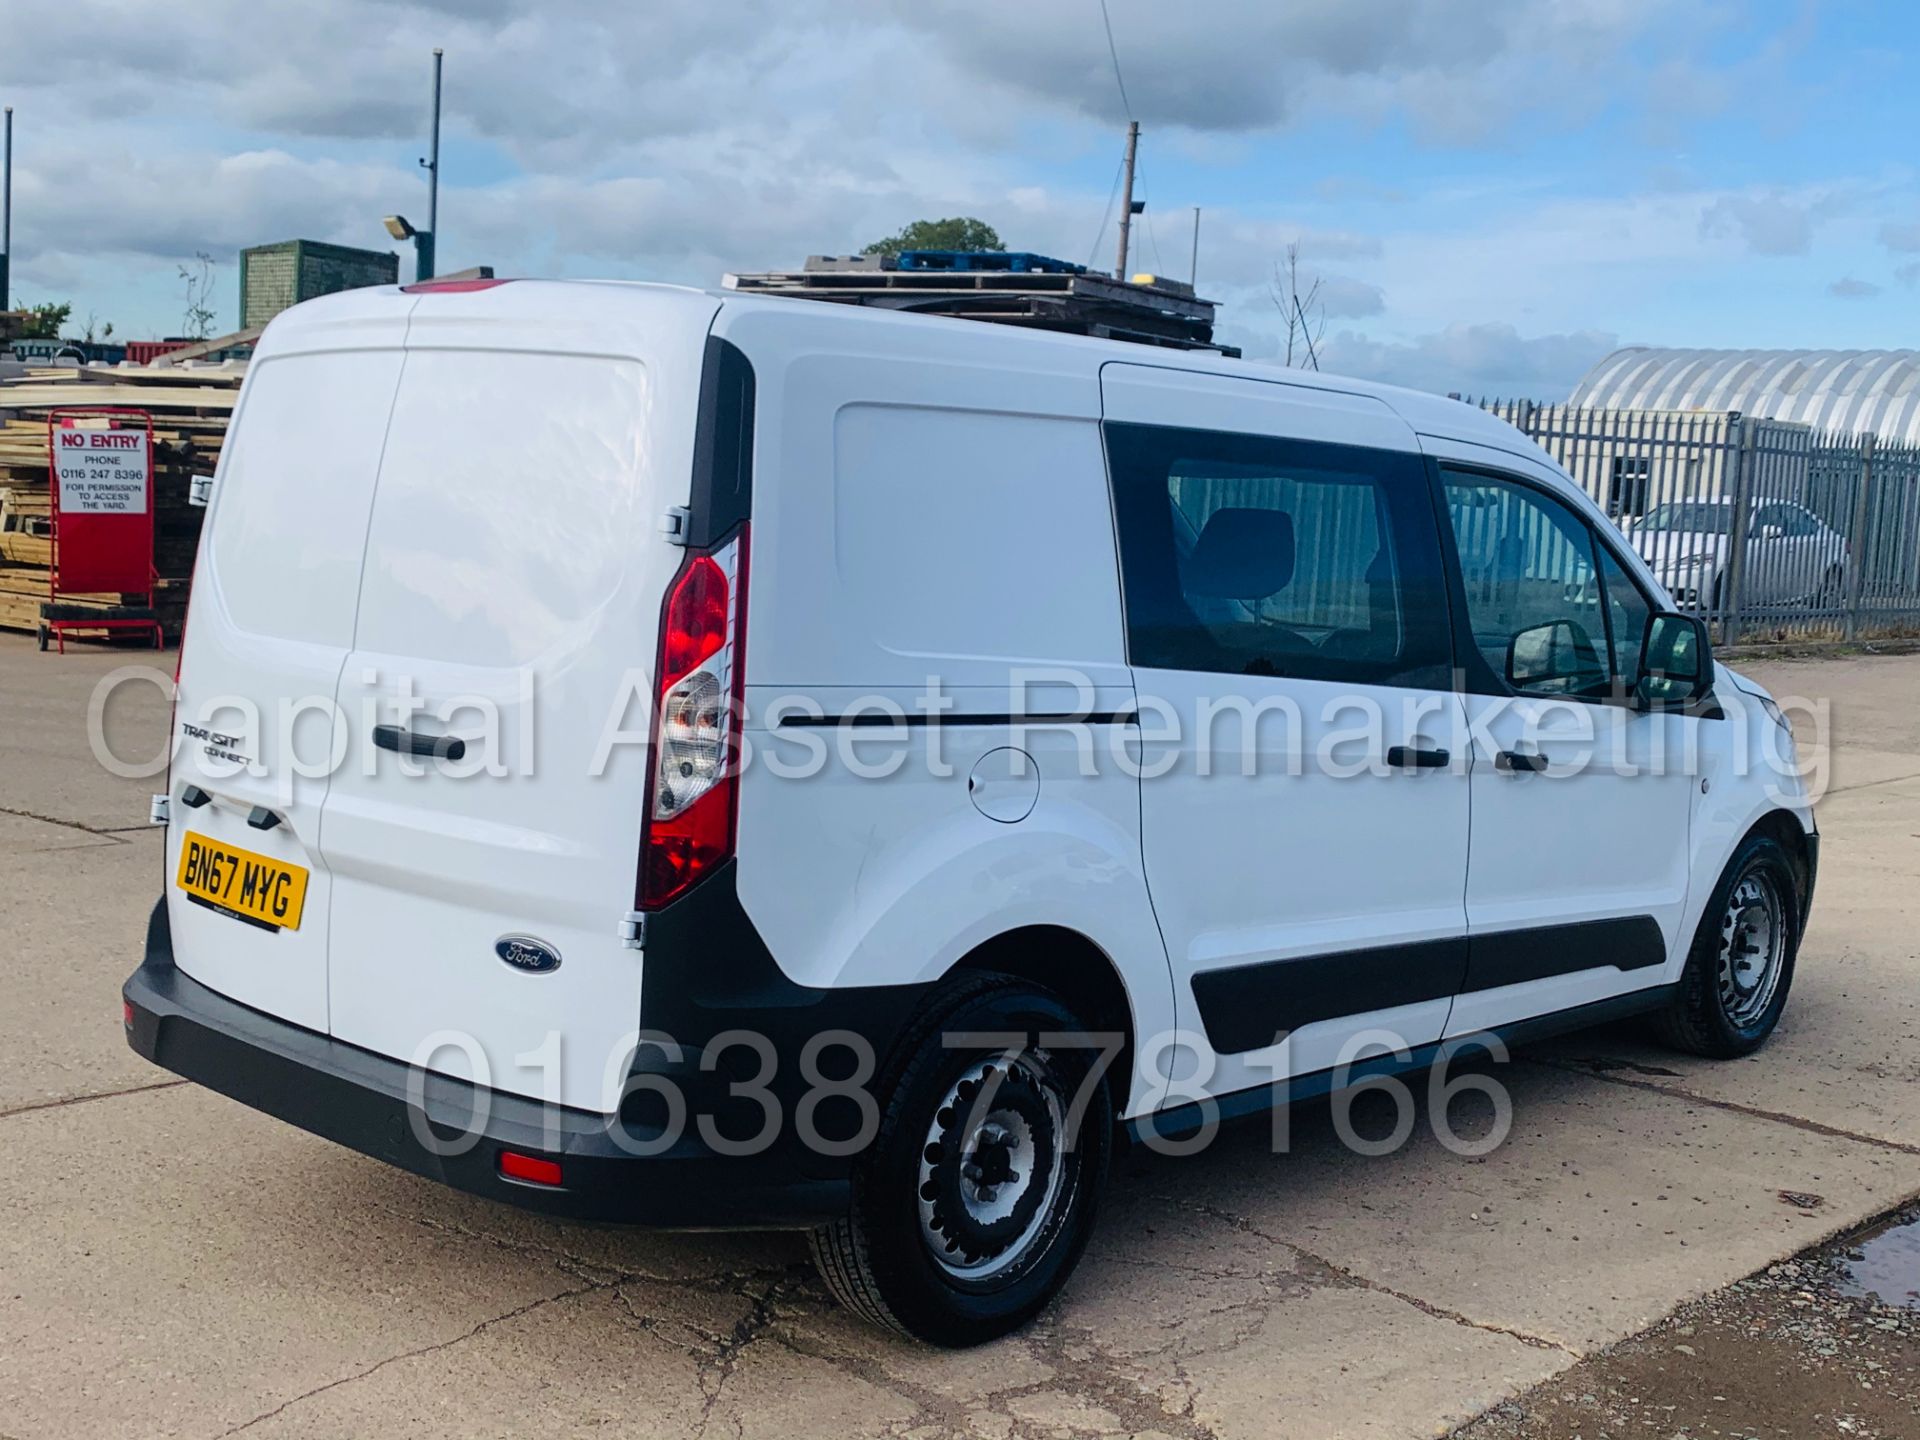 (ON SALE) FORD TRANSIT CONNECT *LWB- 5 SEATER CREW VAN* (2018 - EURO 6) 1.5 TDCI *AIR CON* (1 OWNER) - Image 9 of 40